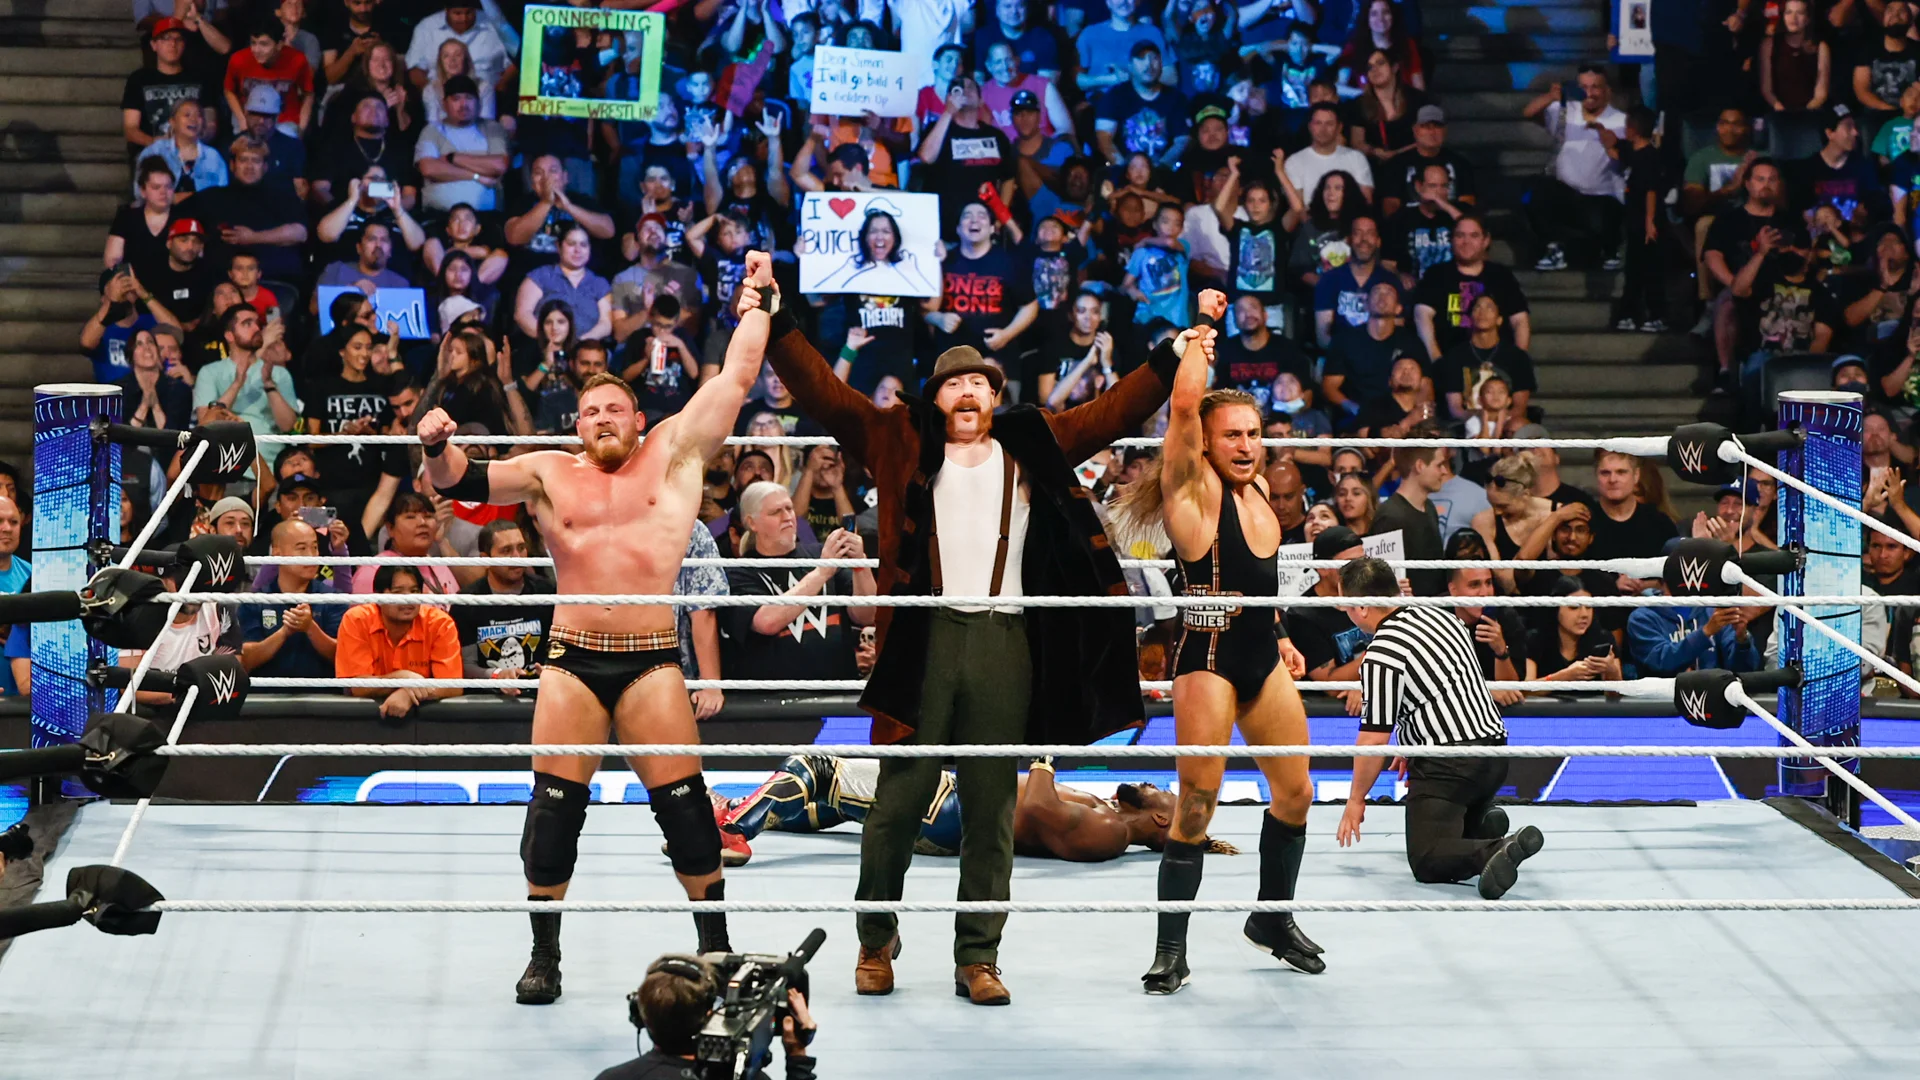 virtuel Klasseværelse eksperimentel WWE SmackDown Results, Highlights and News from 9/16: The Brawling Brutes  Earn Tag Team Title Opportunity